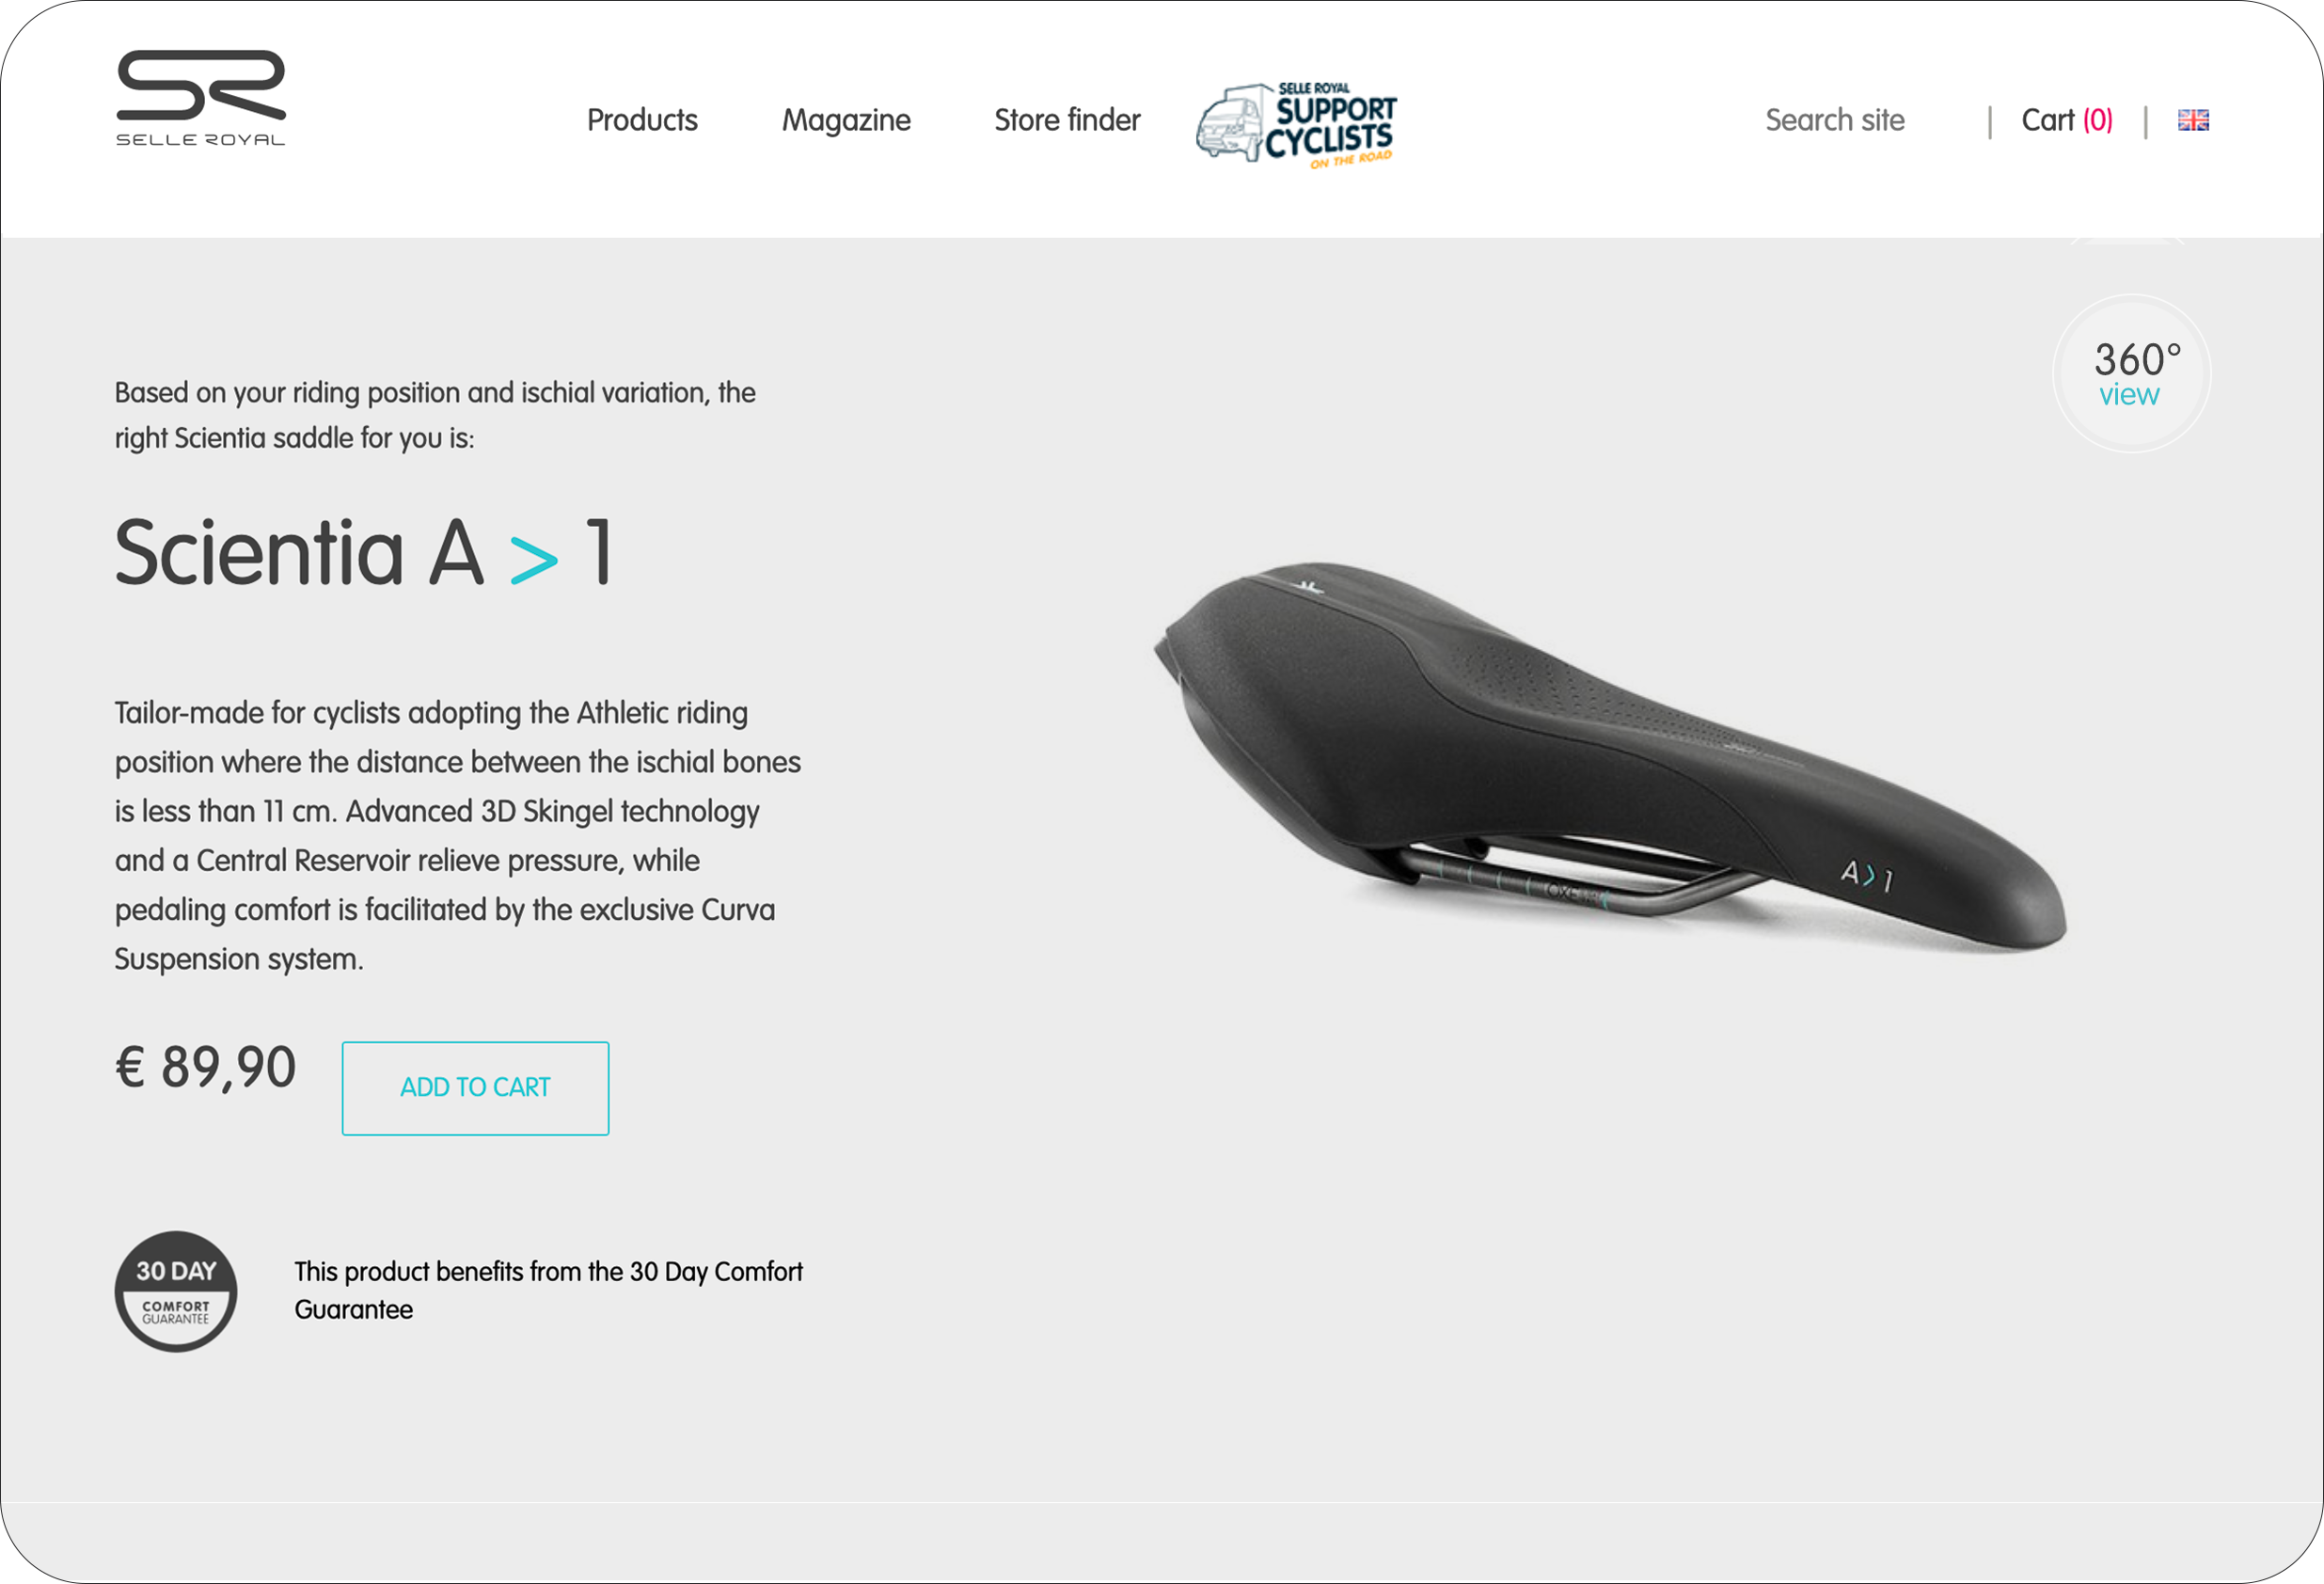 Product Information in Selle Royale e-commerce